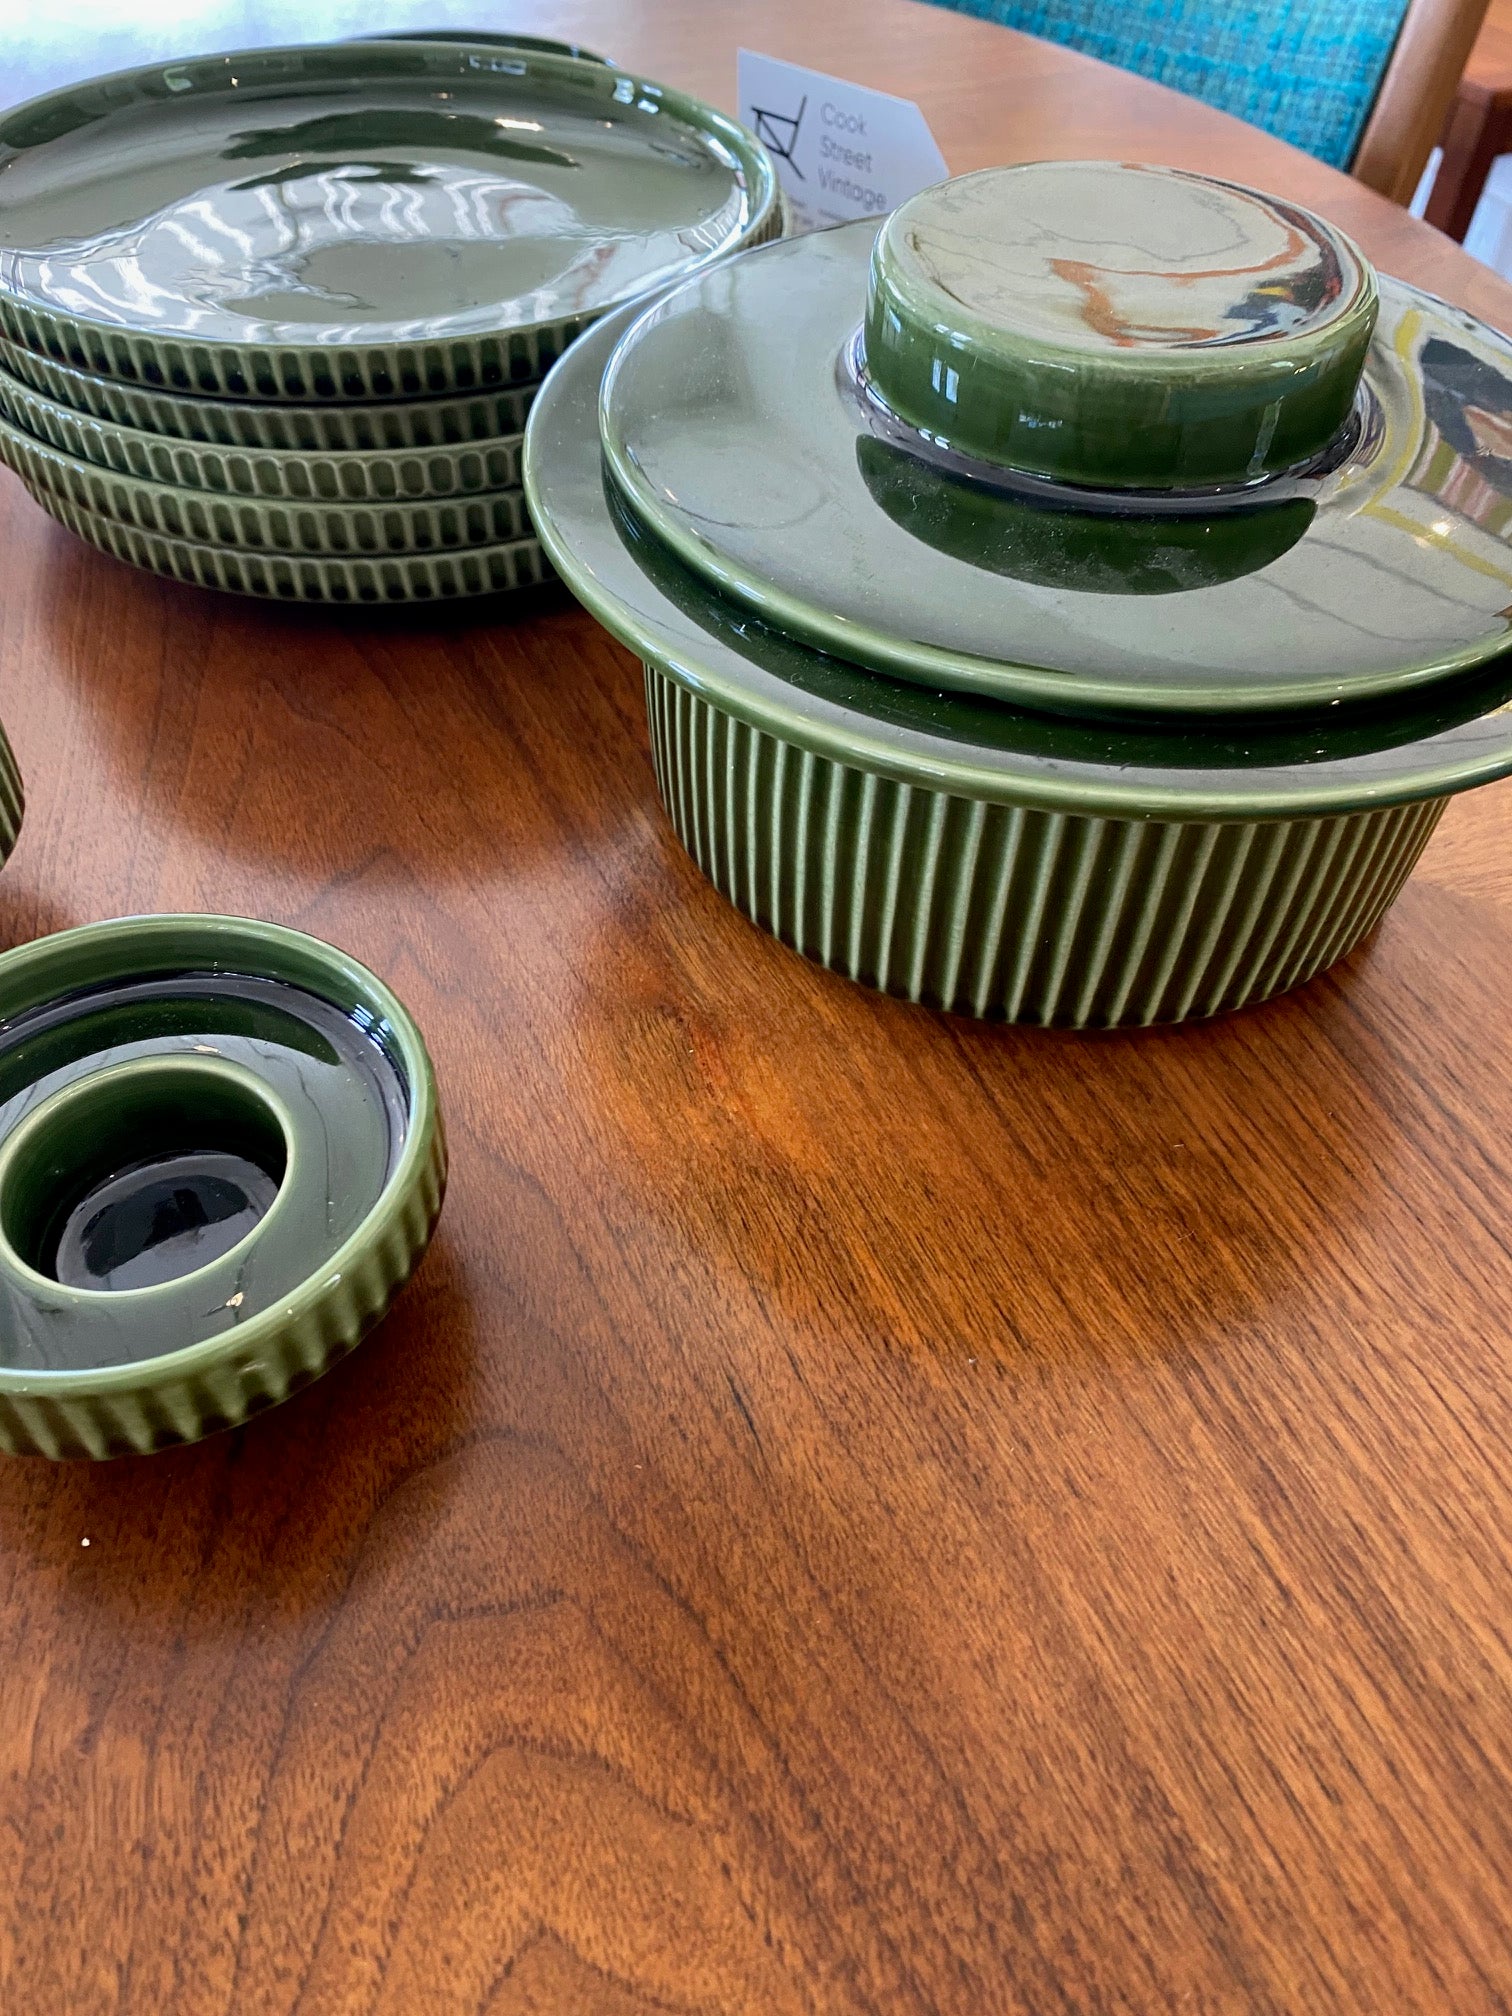 Covered casserole from our Set of mid-century pottery designed by Fokke Hamming for De Driehoek. Dark forest green glaze with a modern striated design. Made in Huizen in Holland- Cook Street Vintage